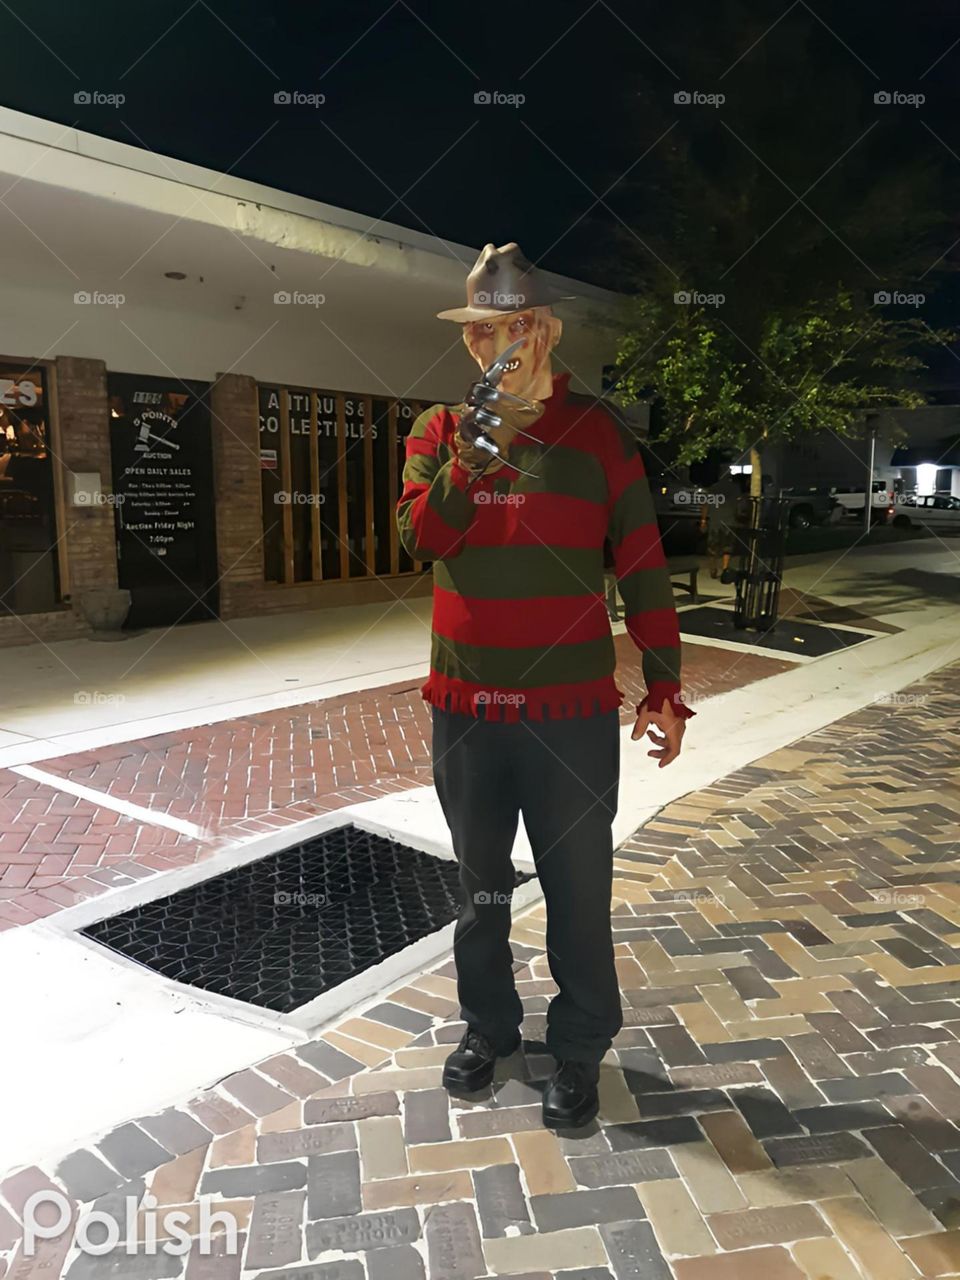 Freddy Kruger, character, pose on the street at night.